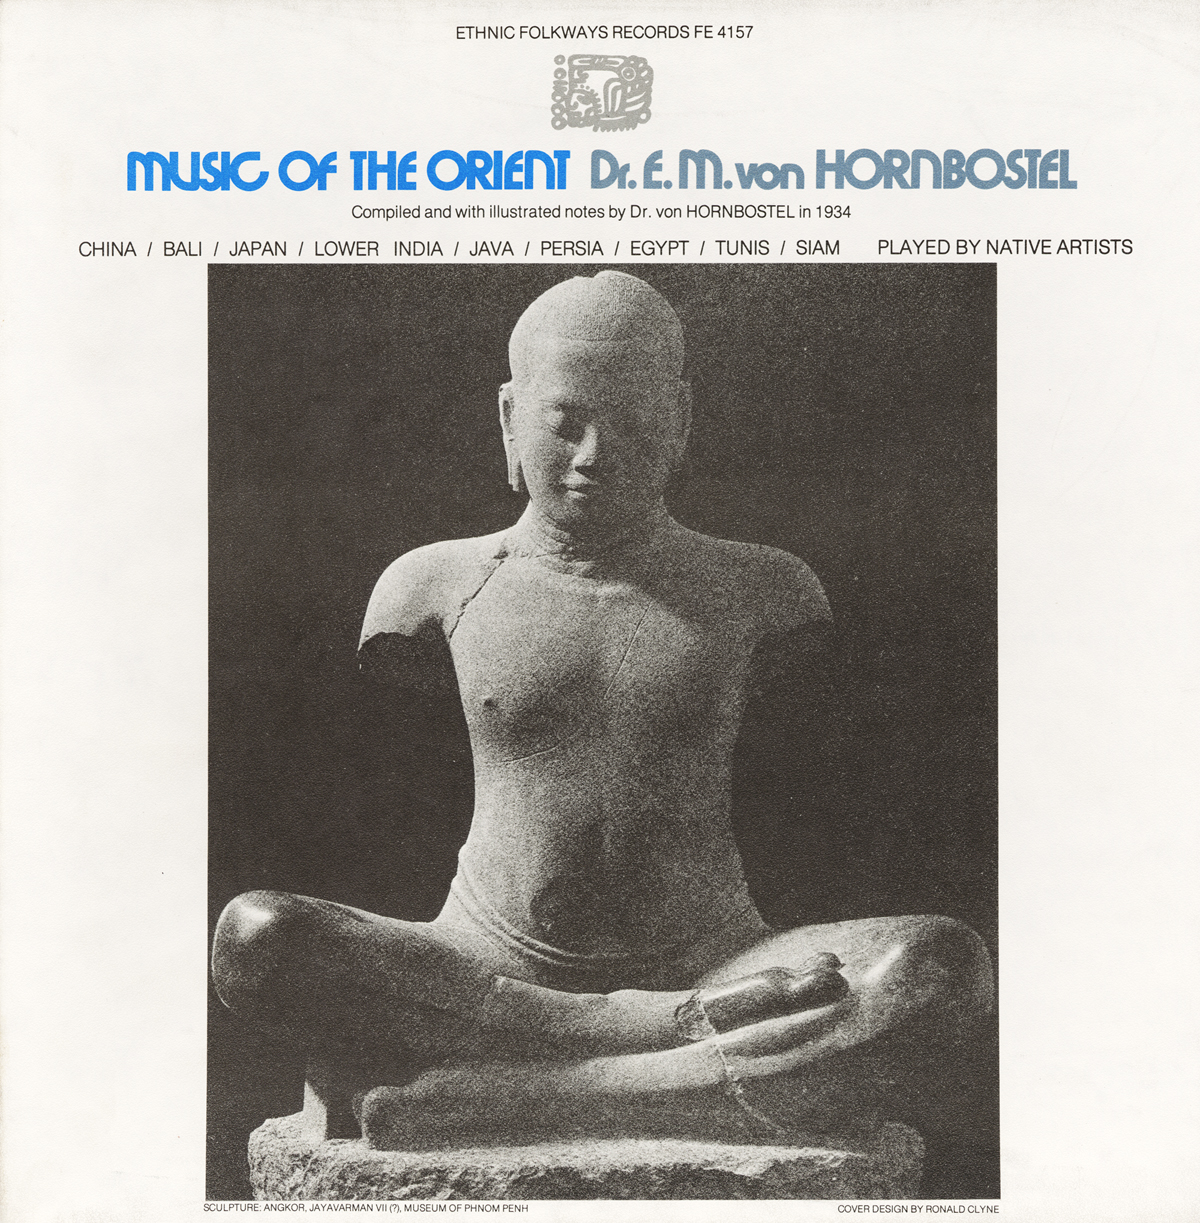 MUSIC OF THE ORIENT / VARIOUS